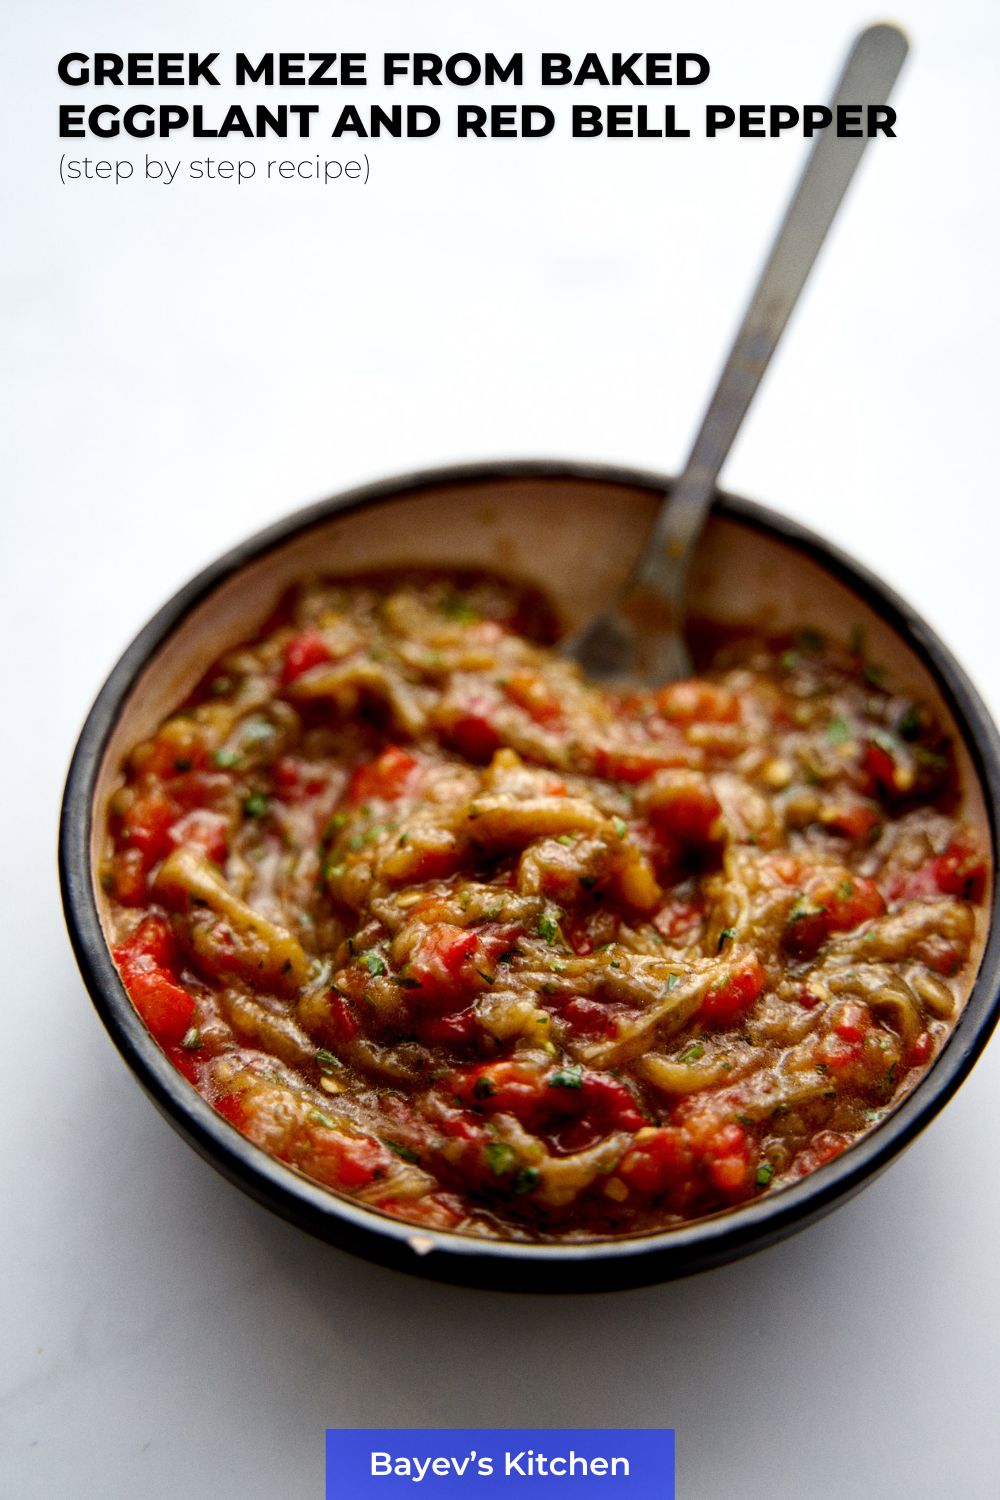 Greek Eggplant Meze with Red Bell Pepper. Recipe with Step by step directions from BayevsKitchen